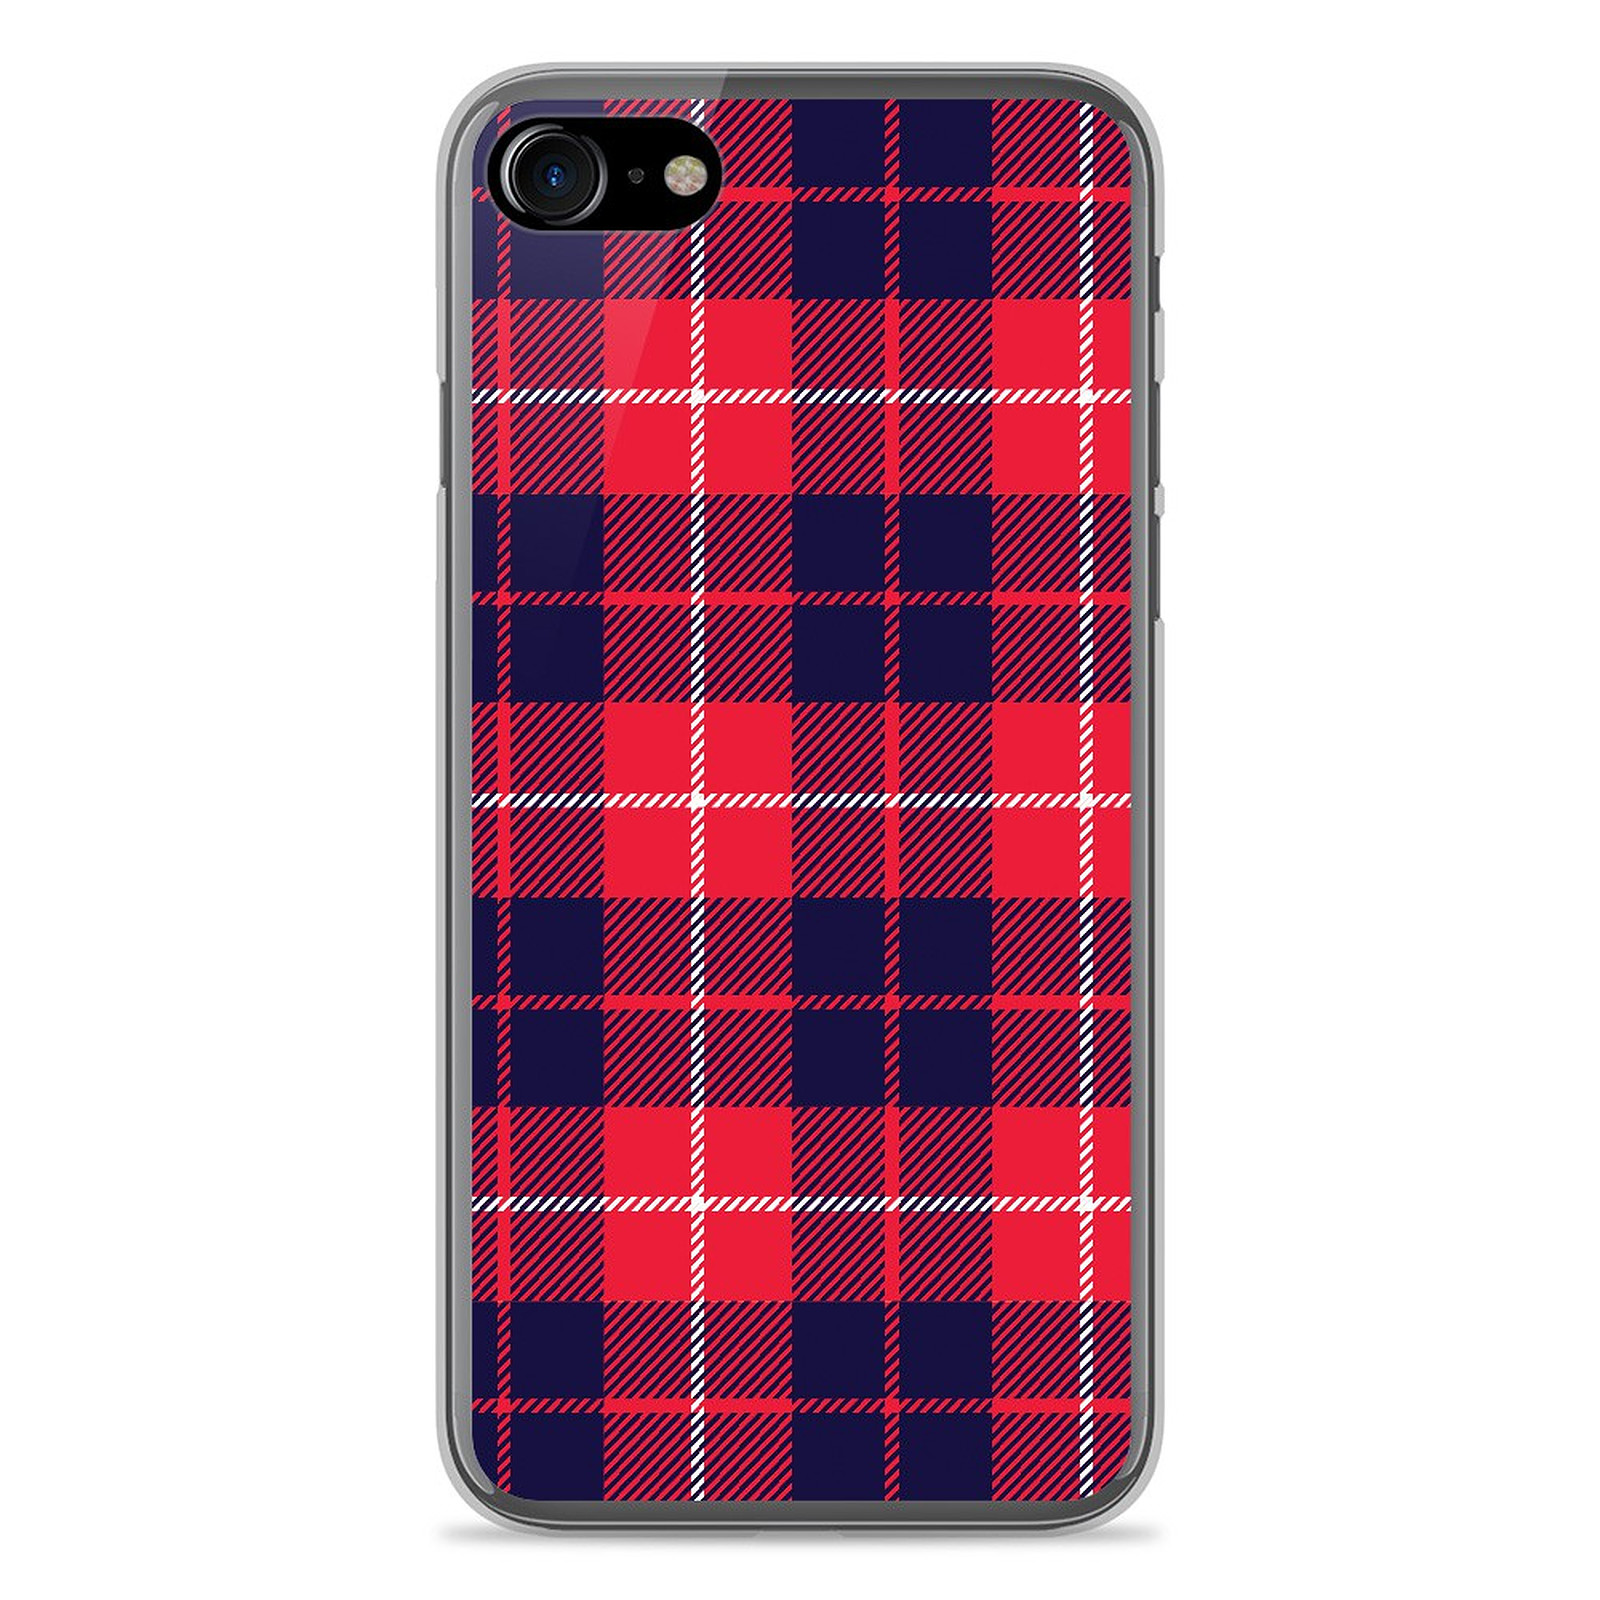 1001 Coques Coque silicone gel Apple IPhone 7 motif Tartan Rouge 2 - Coque telephone 1001Coques